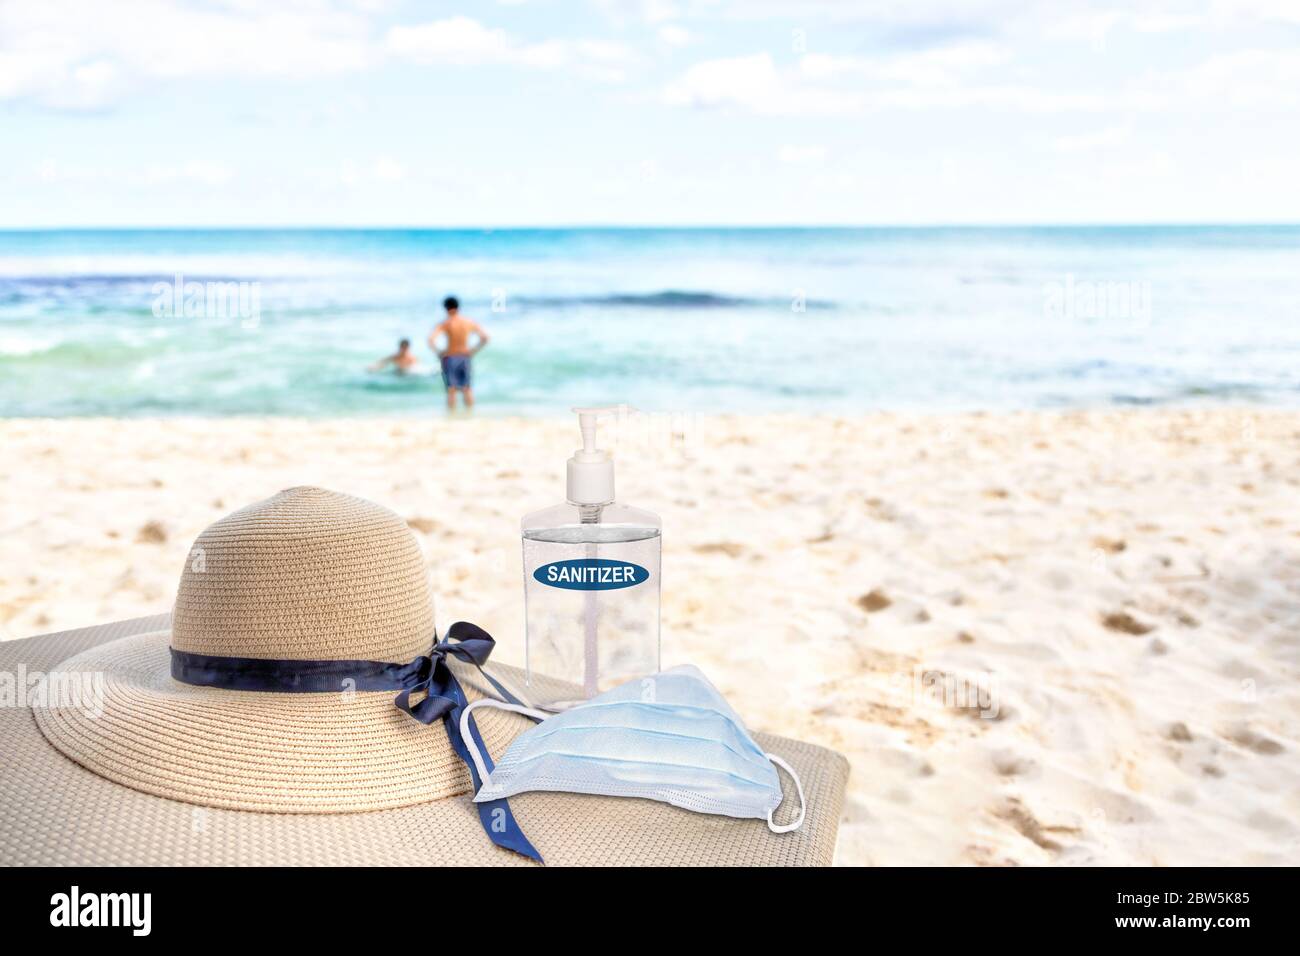 Vacationing in the New Normal after COVID-19 coronavirus pandemic. Tourism concept showing lounge chair on sandy beach with beach hat, hand sanitizer, Stock Photo